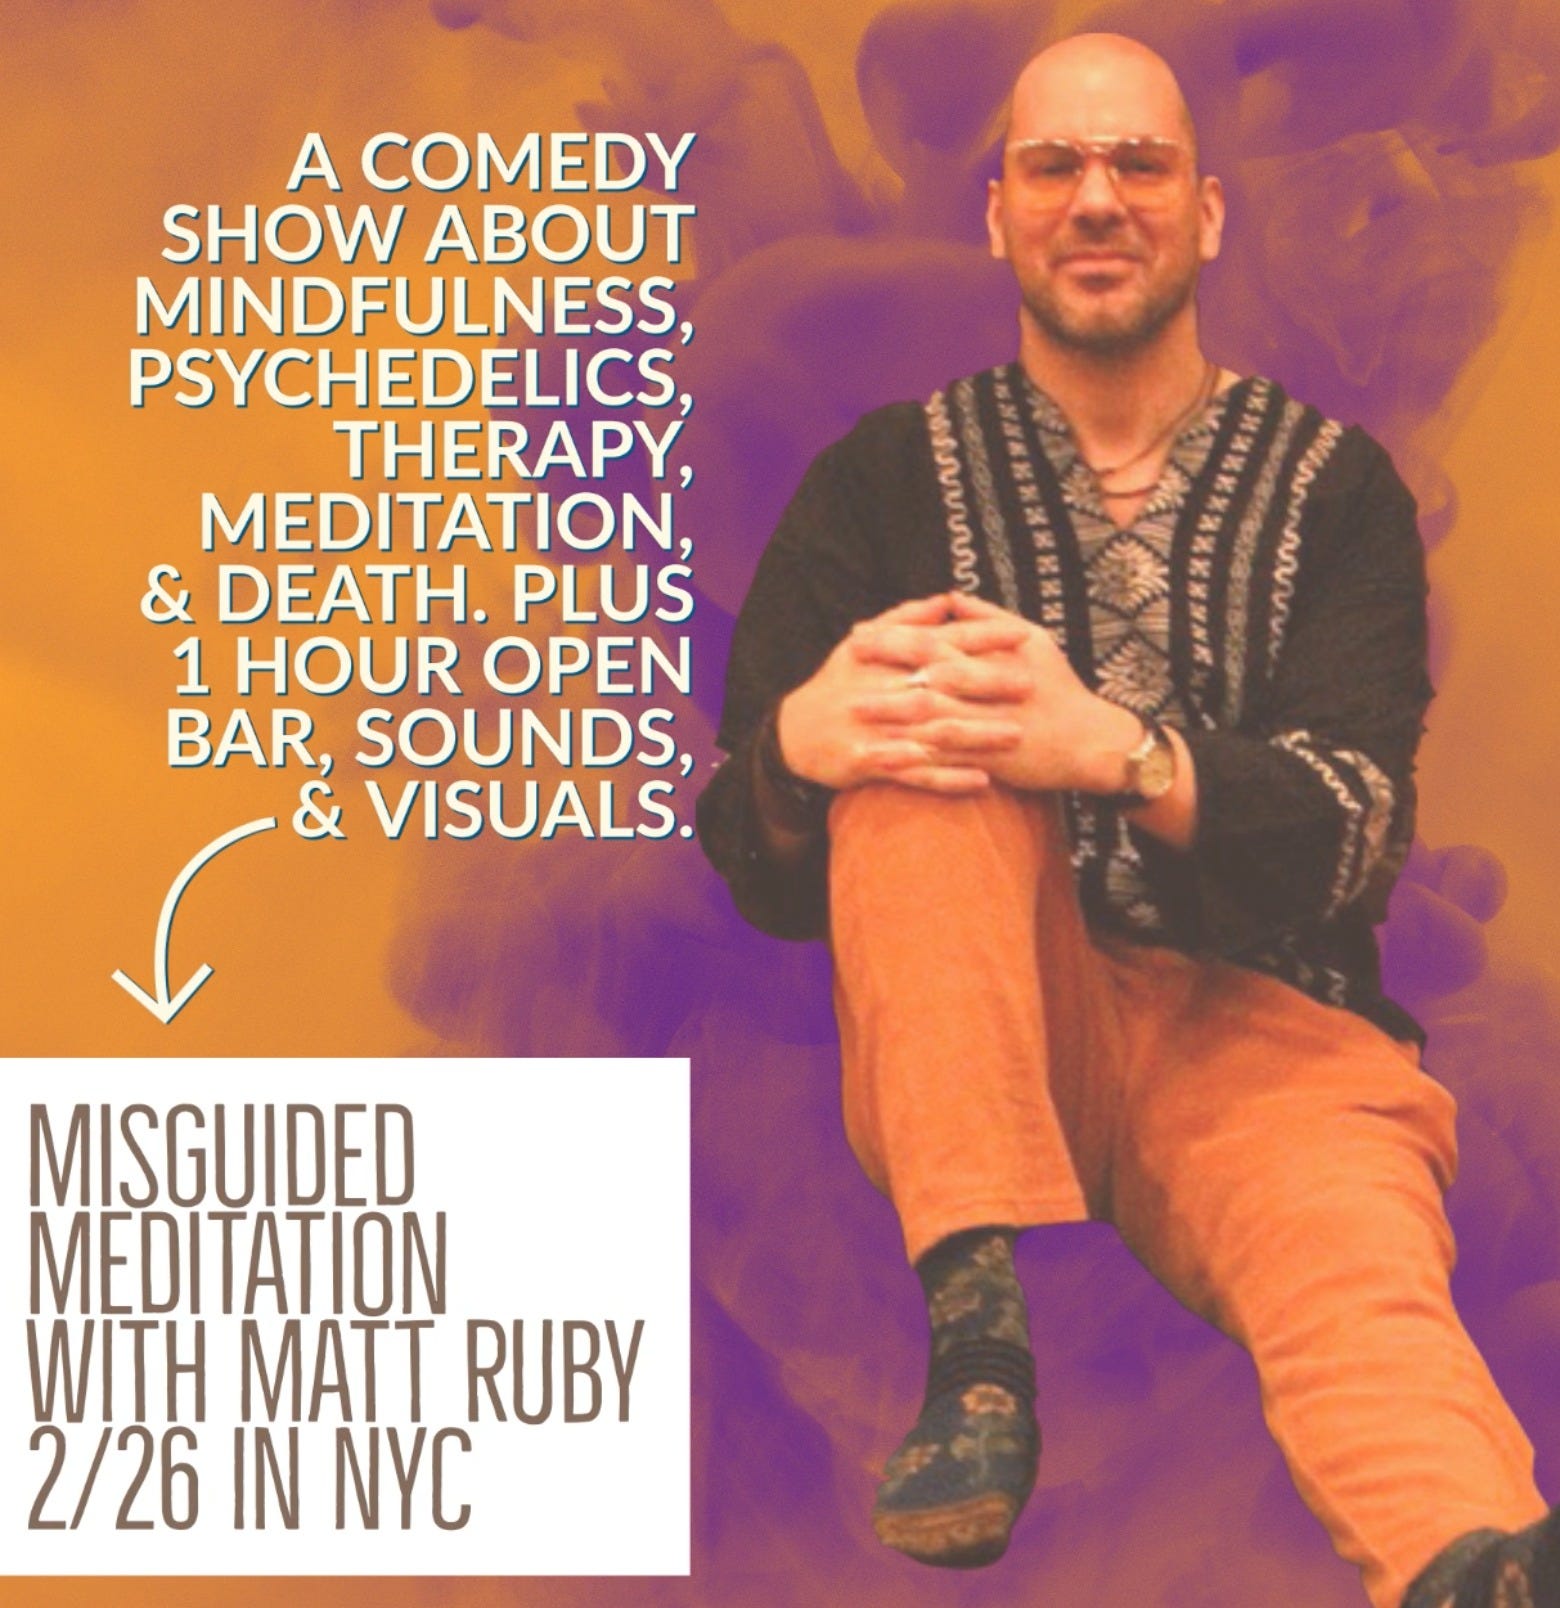 May be an image of 1 person and text that says 'A COMEDY SHOW ABOUT MINDFULNESS, PSYCHEDELICS, THERAPY, MEDITATION & DEATH. PLUS 1 HOUR OPEN BAR, SOUNDS & VISUALS. Lanunu MISGUIDED MEDITATION WITH MATT RUBY 2/26 IN NYC'